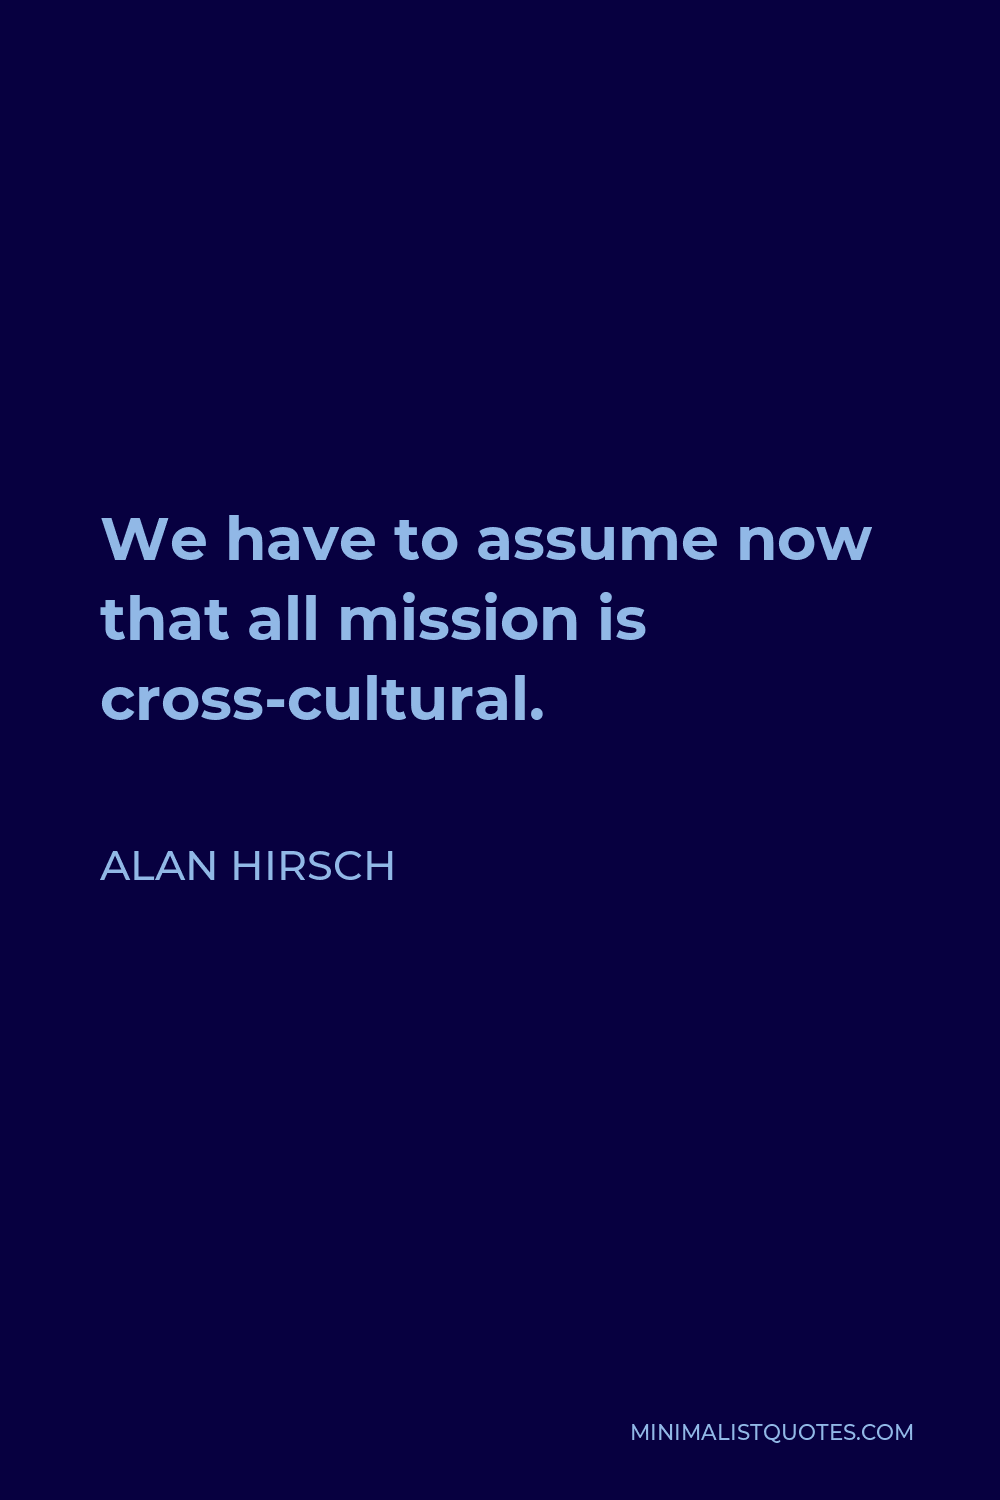 Alan Hirsch Quote - We have to assume now that all mission is cross-cultural.